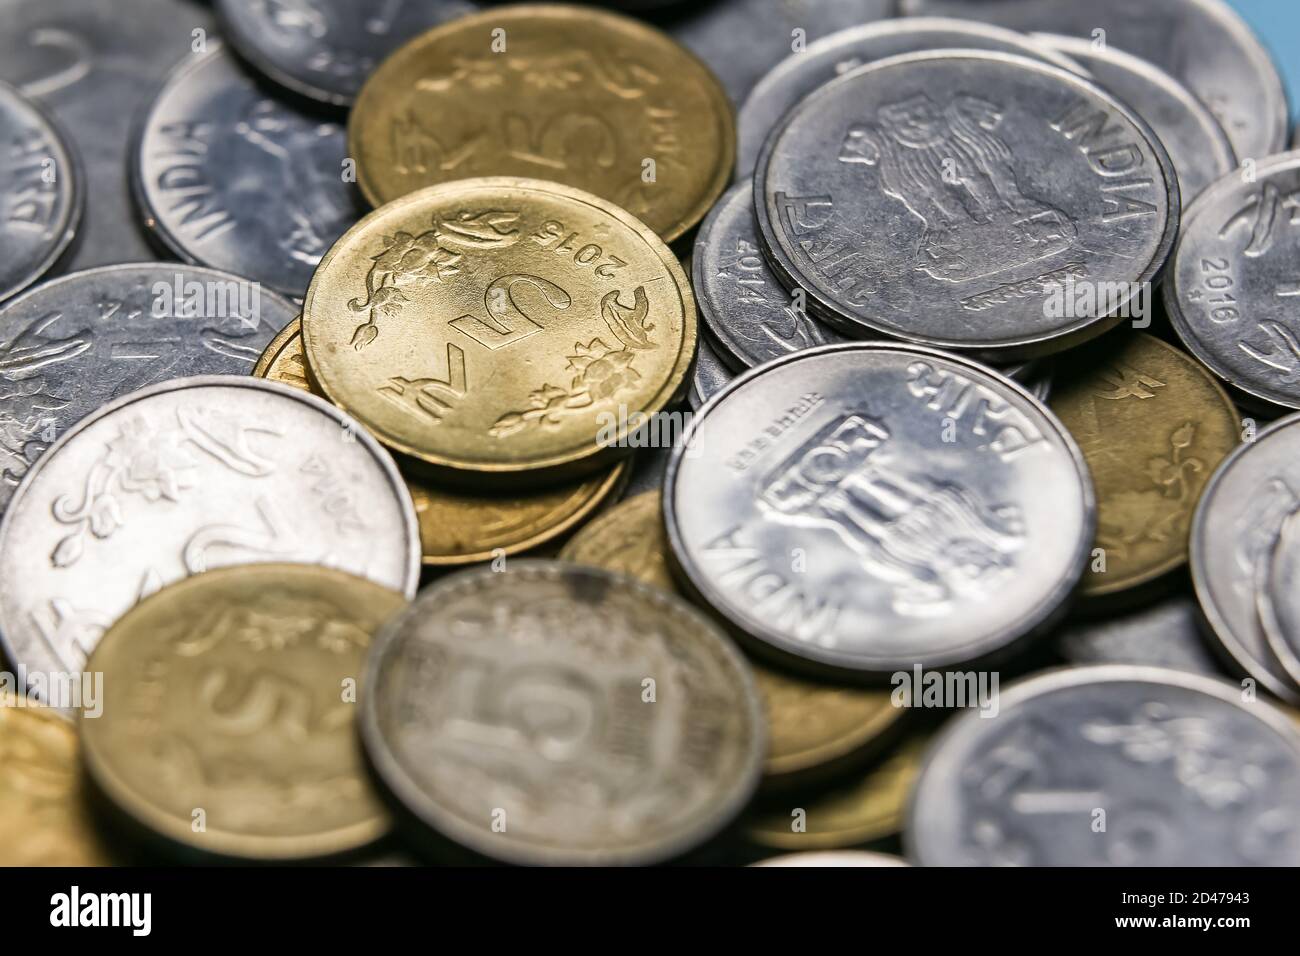 Indian Rupee Coins High Resolution Stock Photography and Images - Alamy